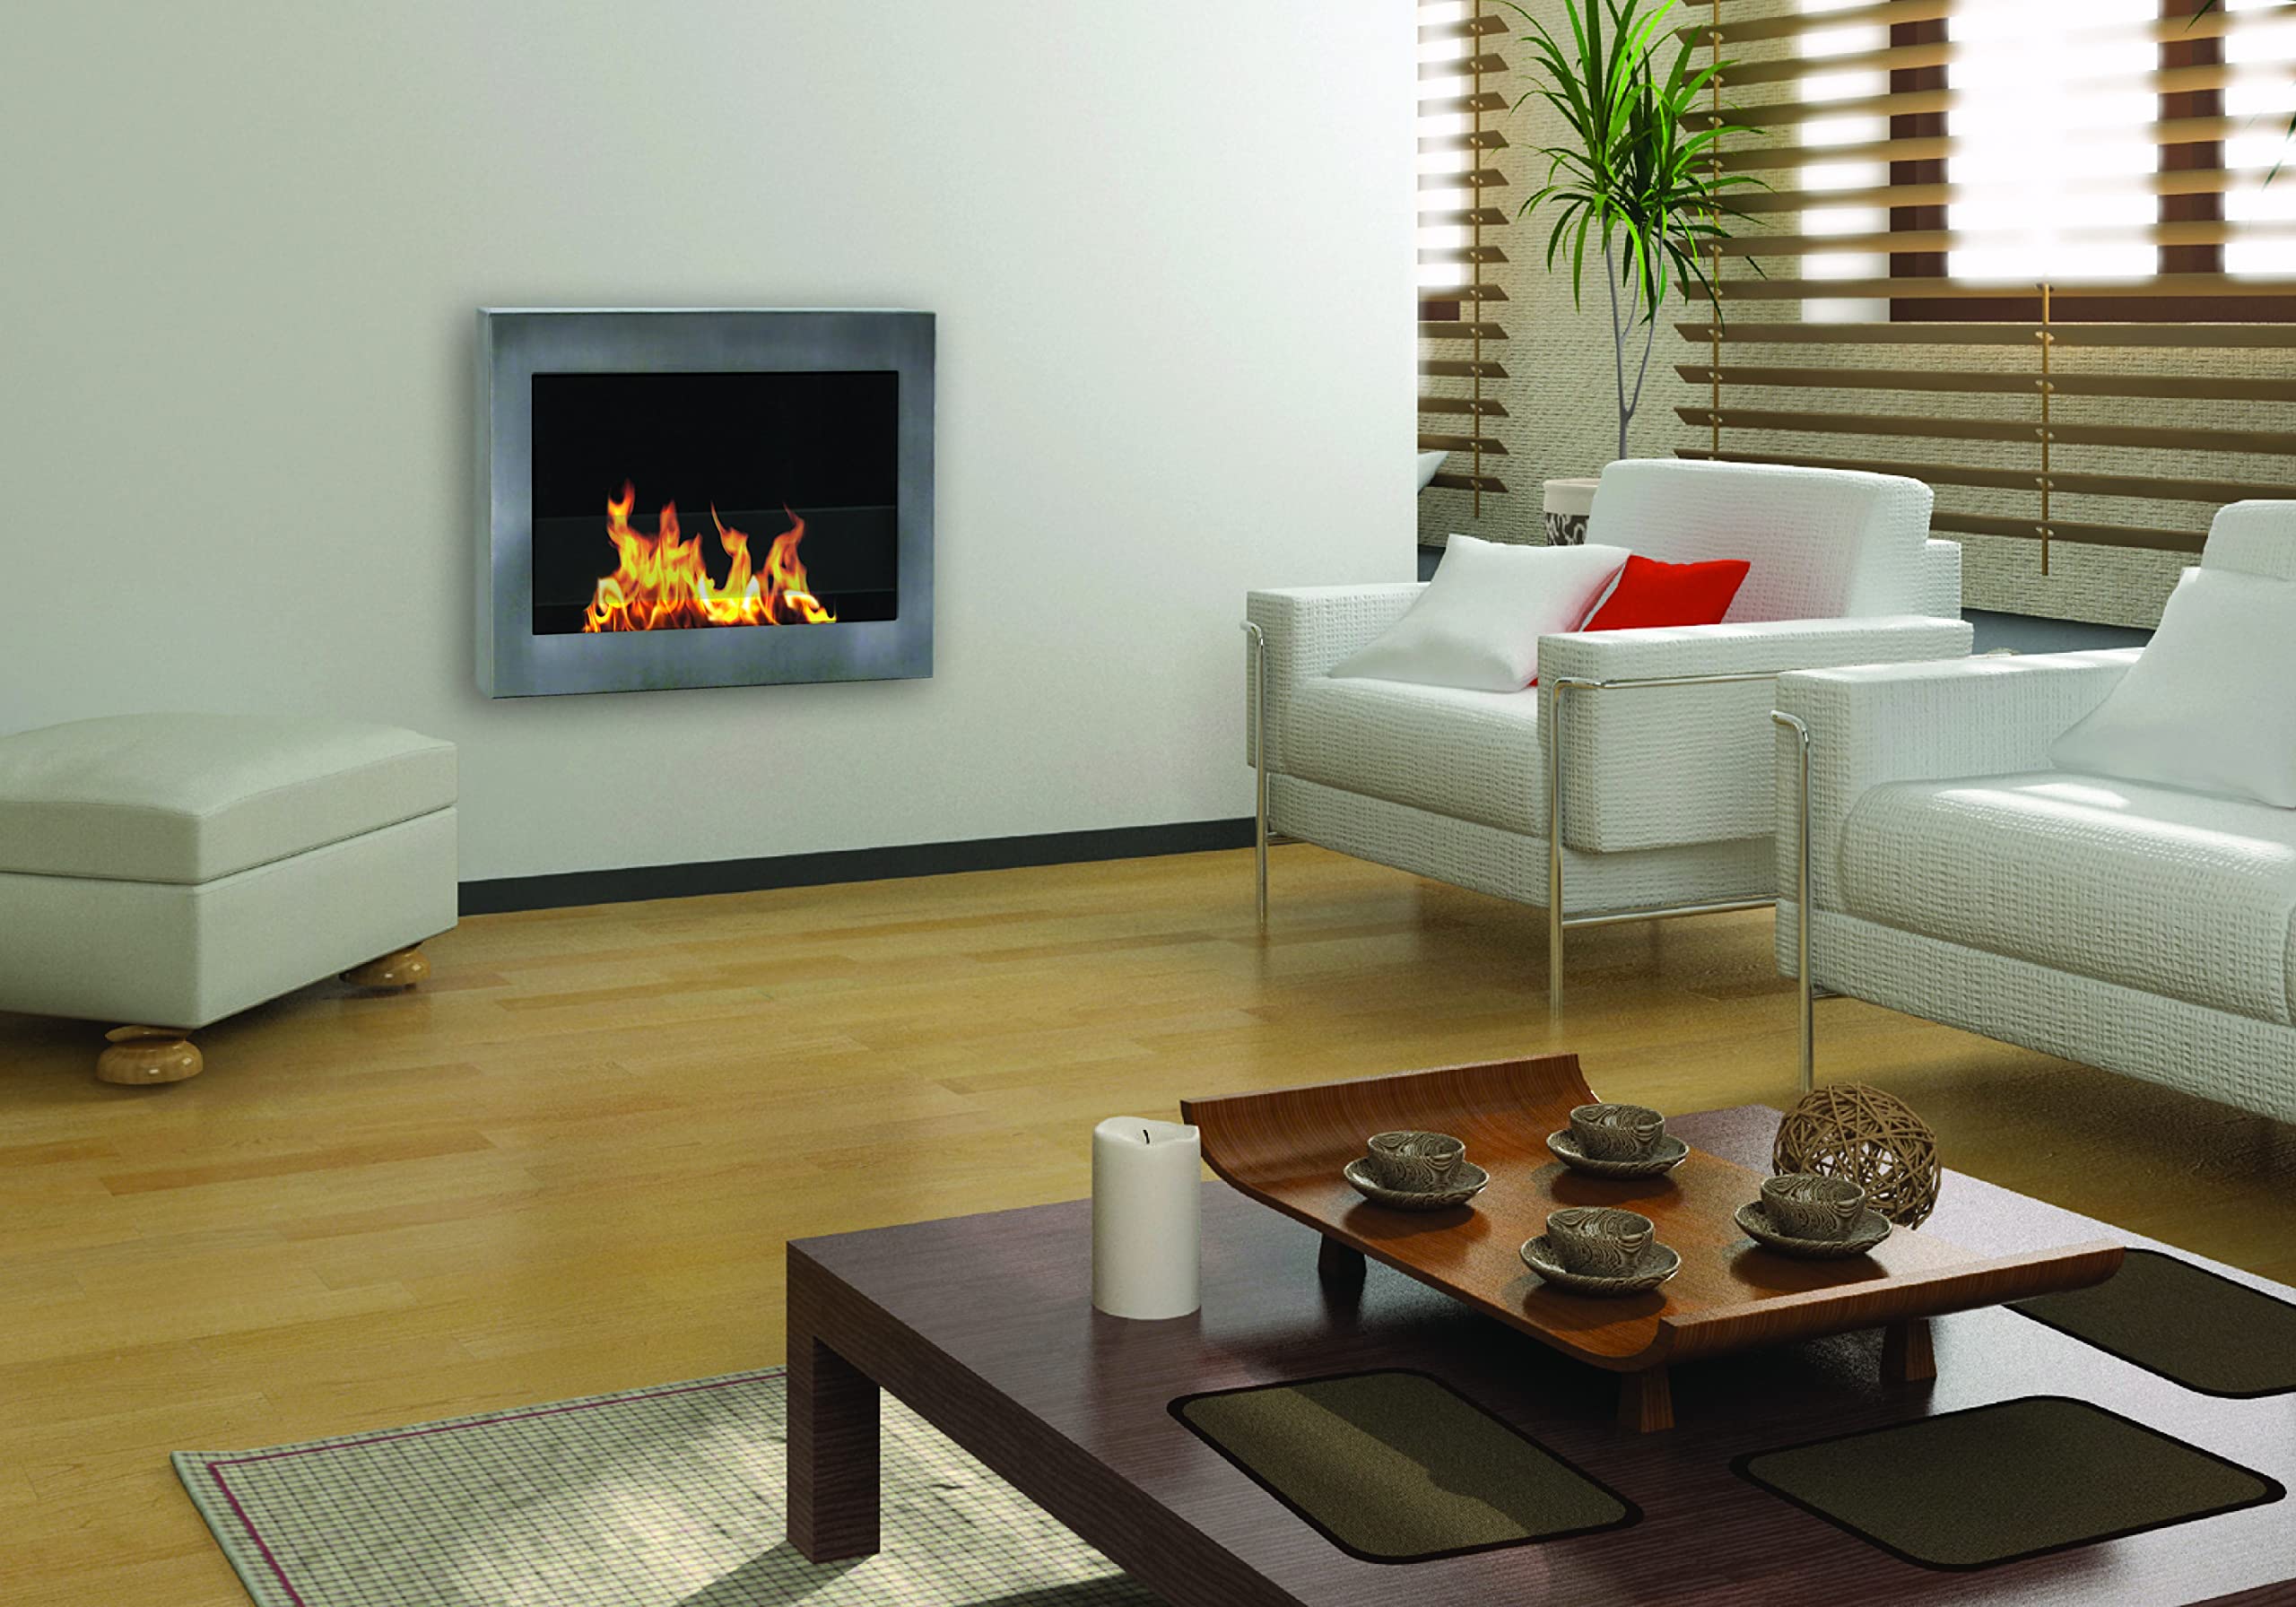 Anywhere Fireplace Indoor Wall Mount Fireplace - SoHo (White-High Gloss) Model